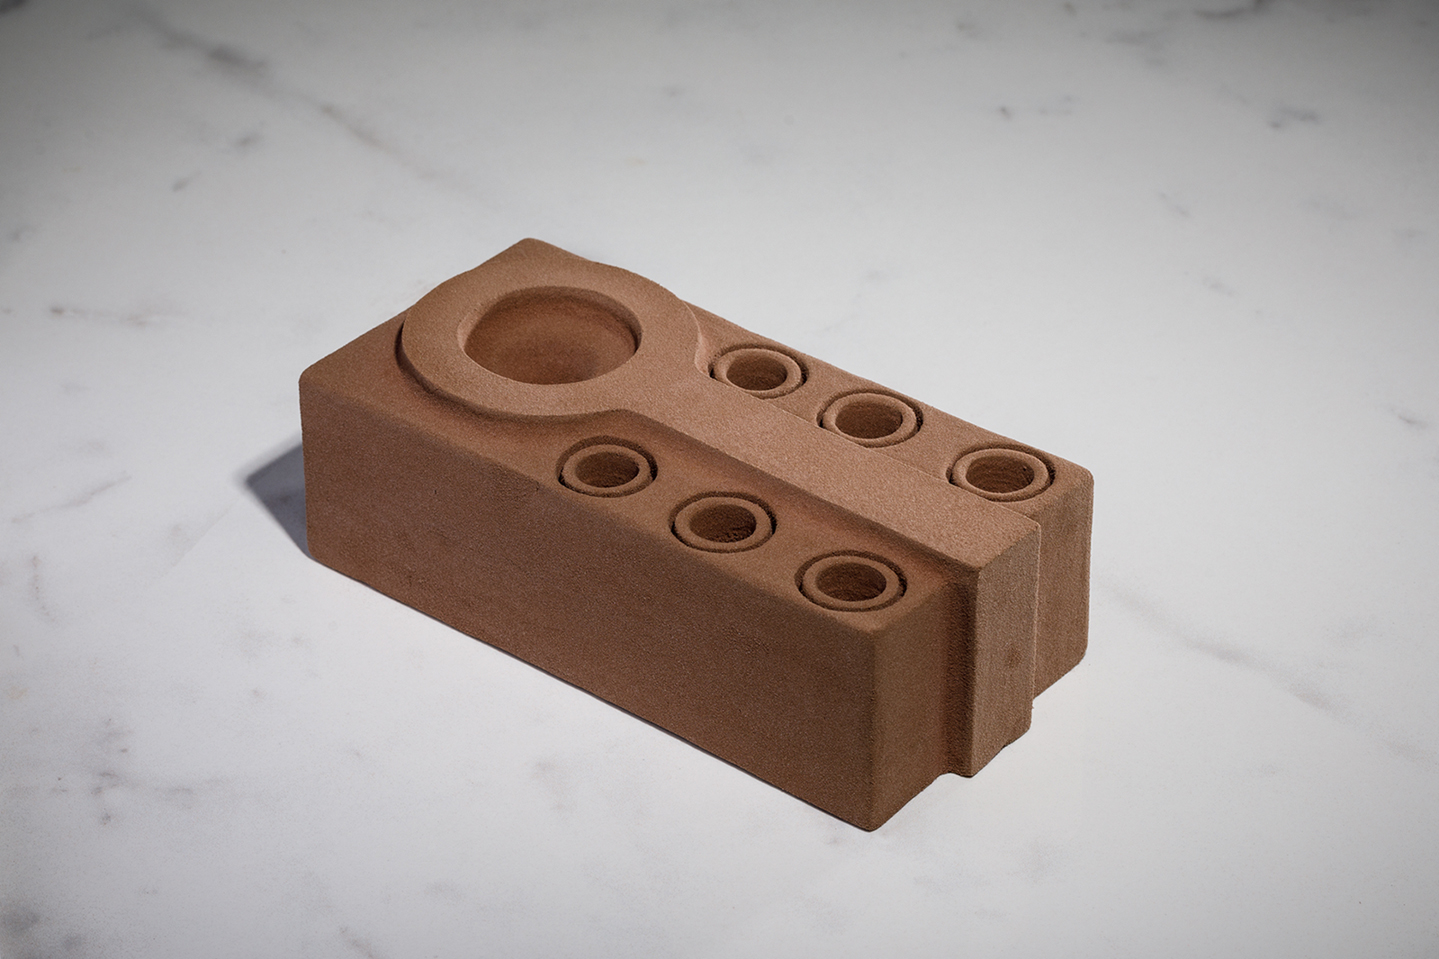 Brown hand-carved, biodegradable florist oasis foam in the shape of a sculptural brick.